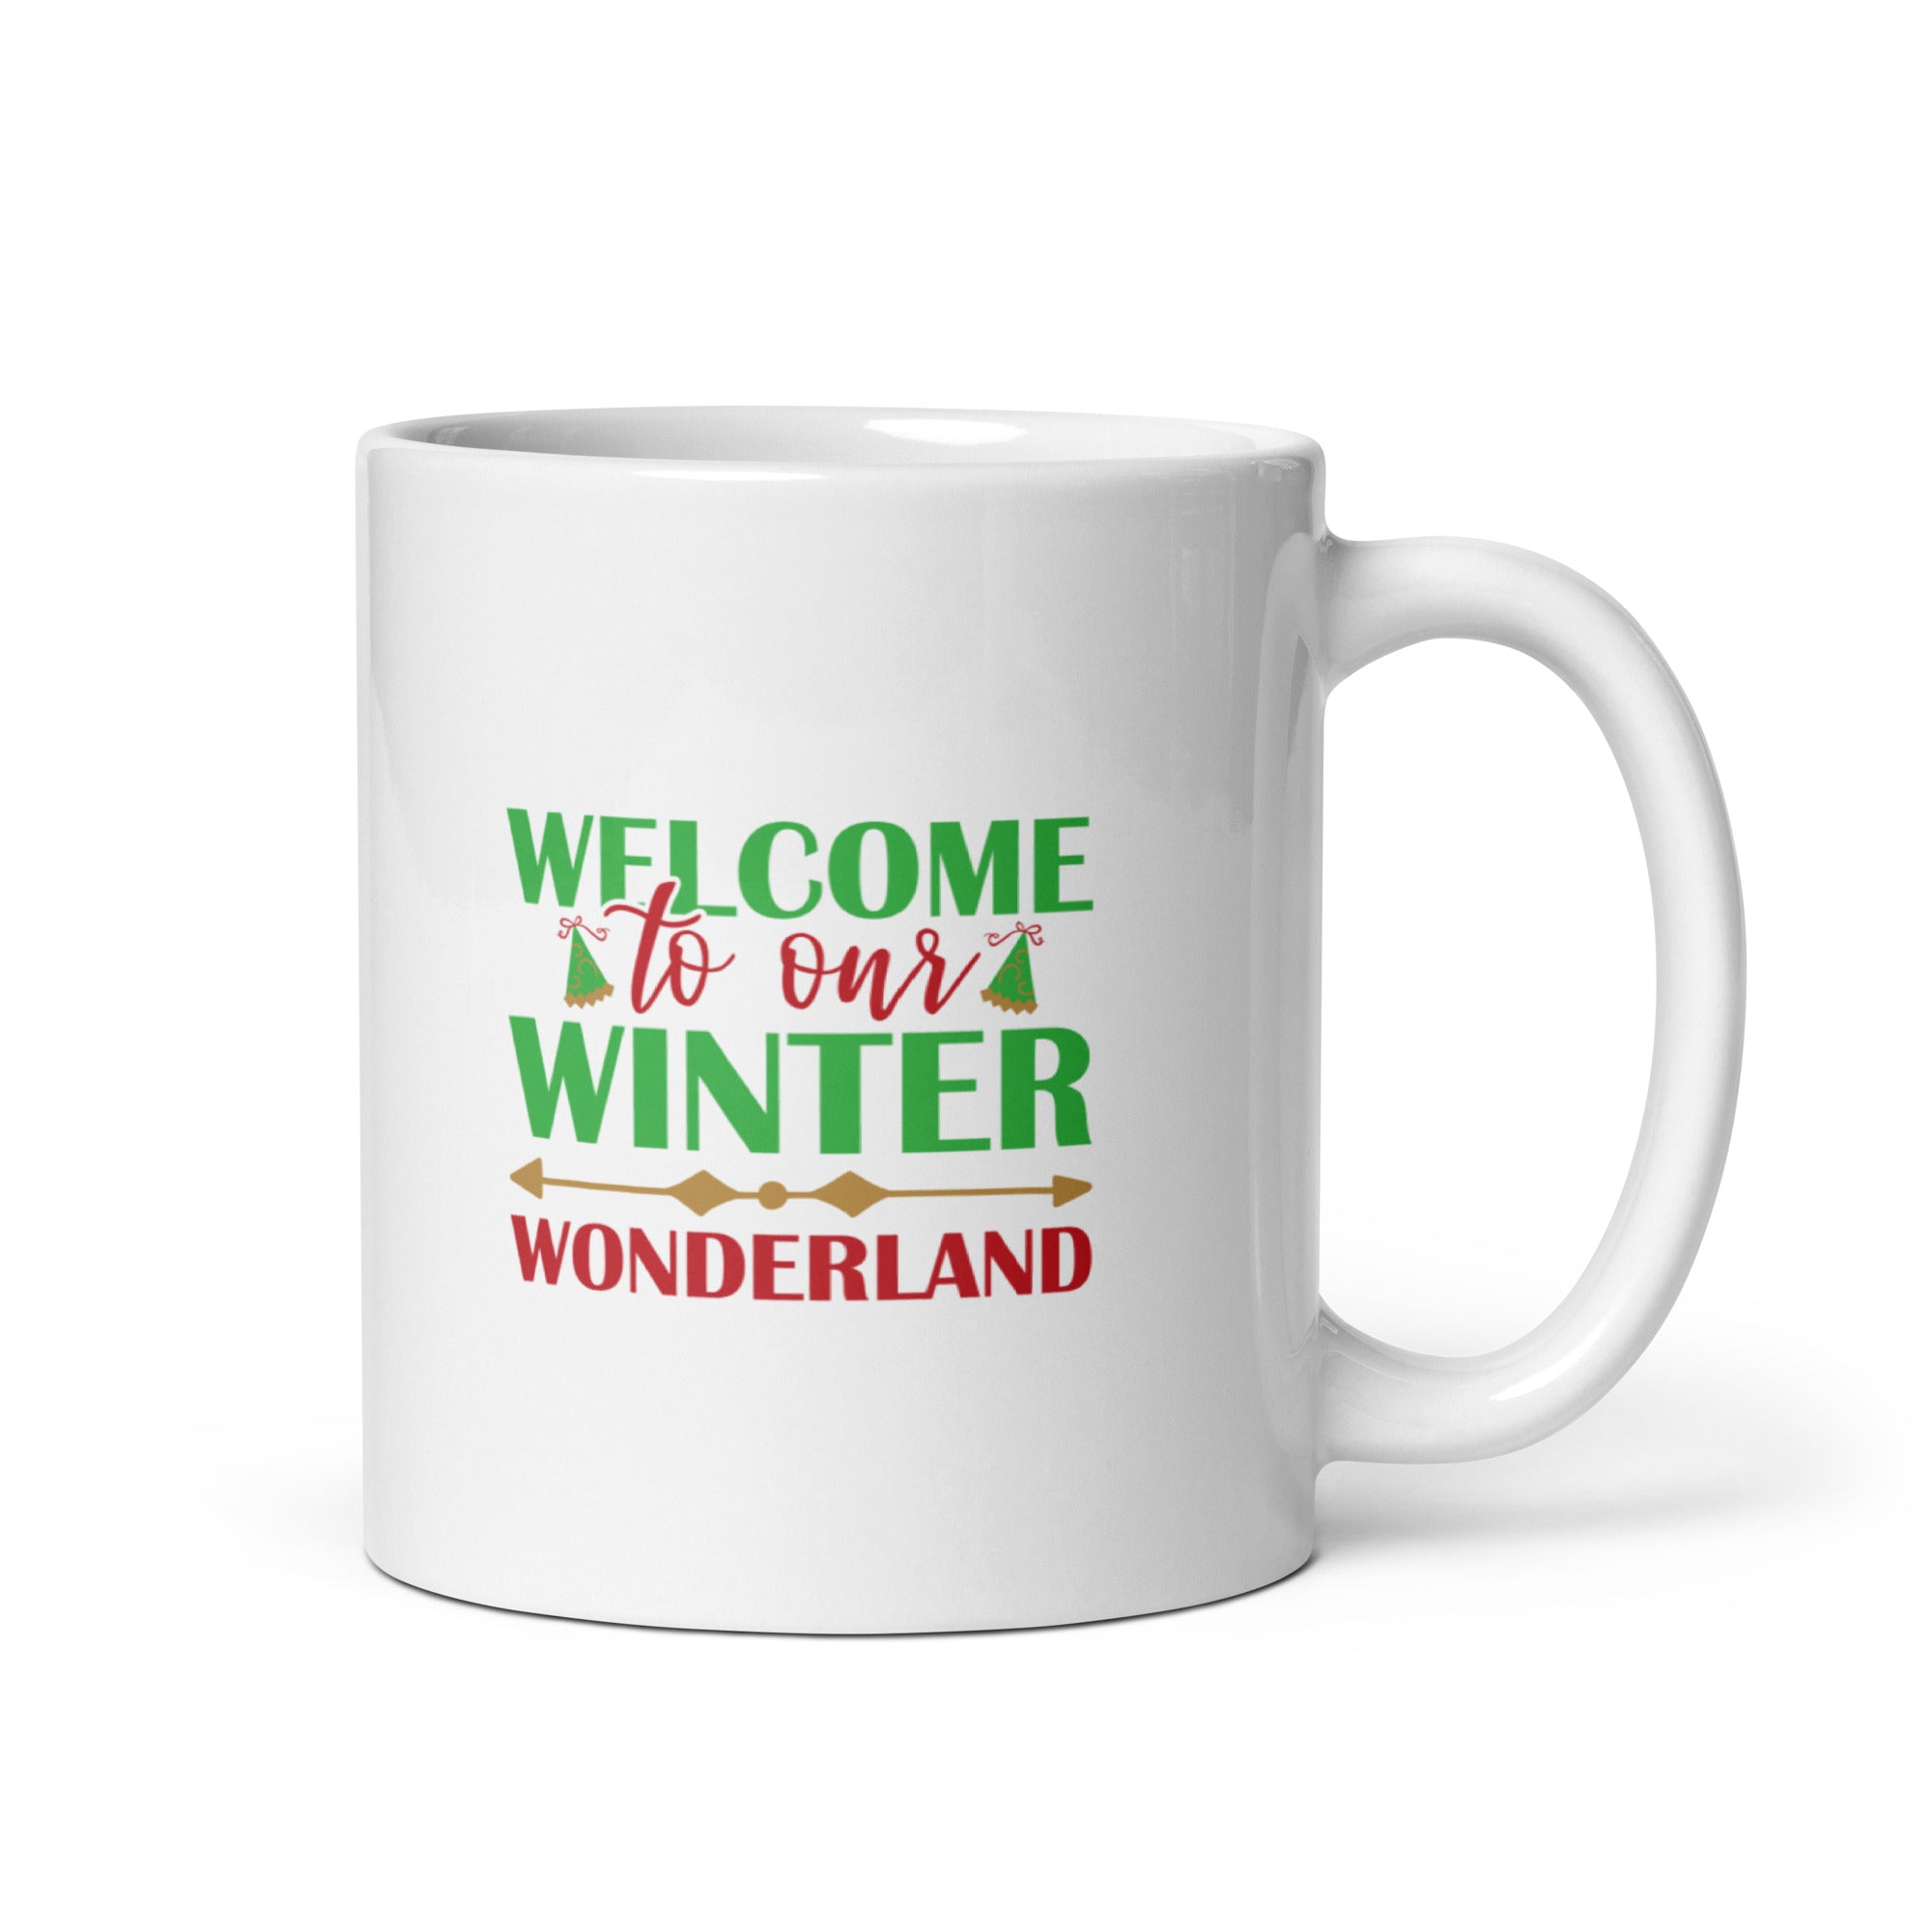 Welcome To Our Winter Wonderland - White glossy mug